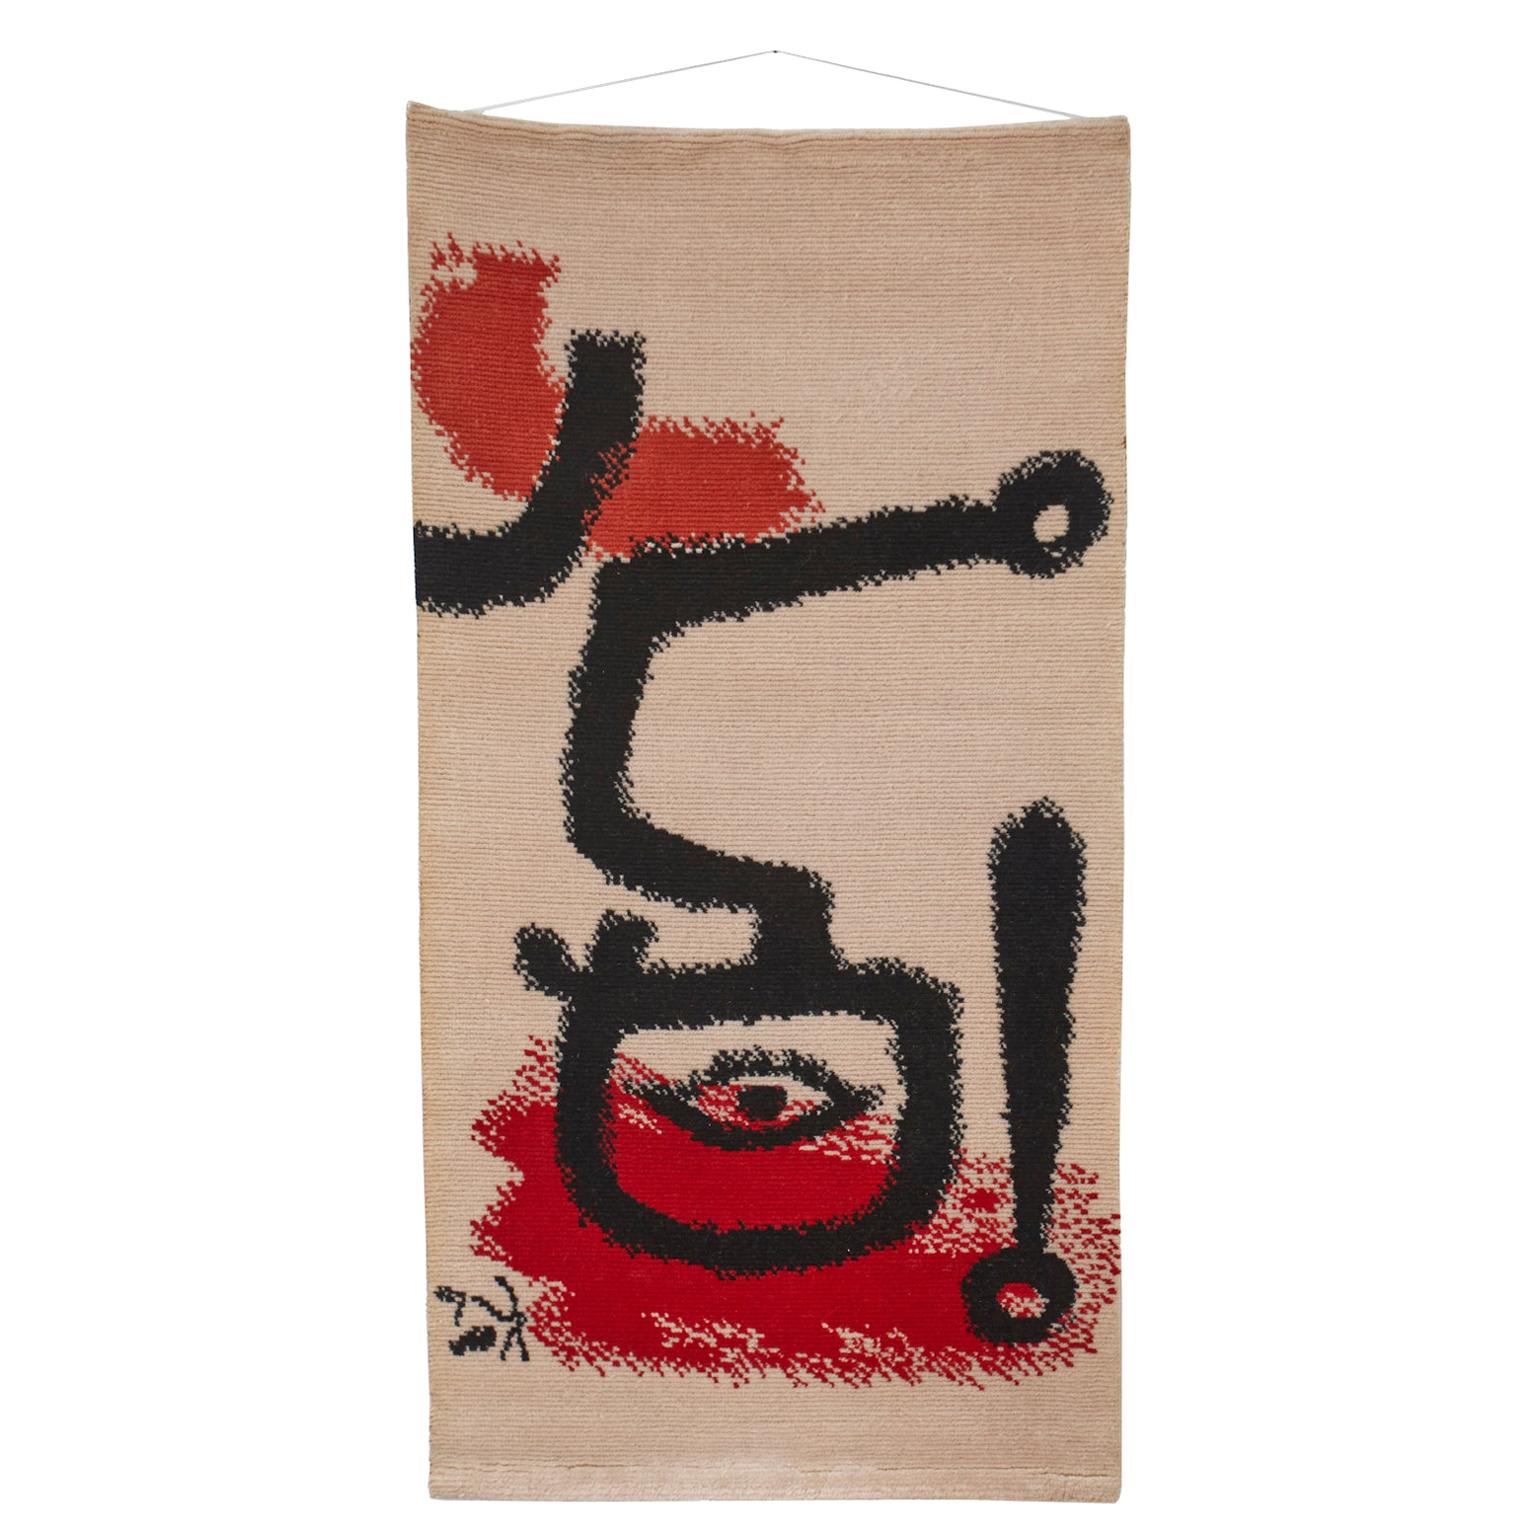 The Drummer Boy after Paul Klee, 100 Percent Wool Rug/Wall Hanging For Sale